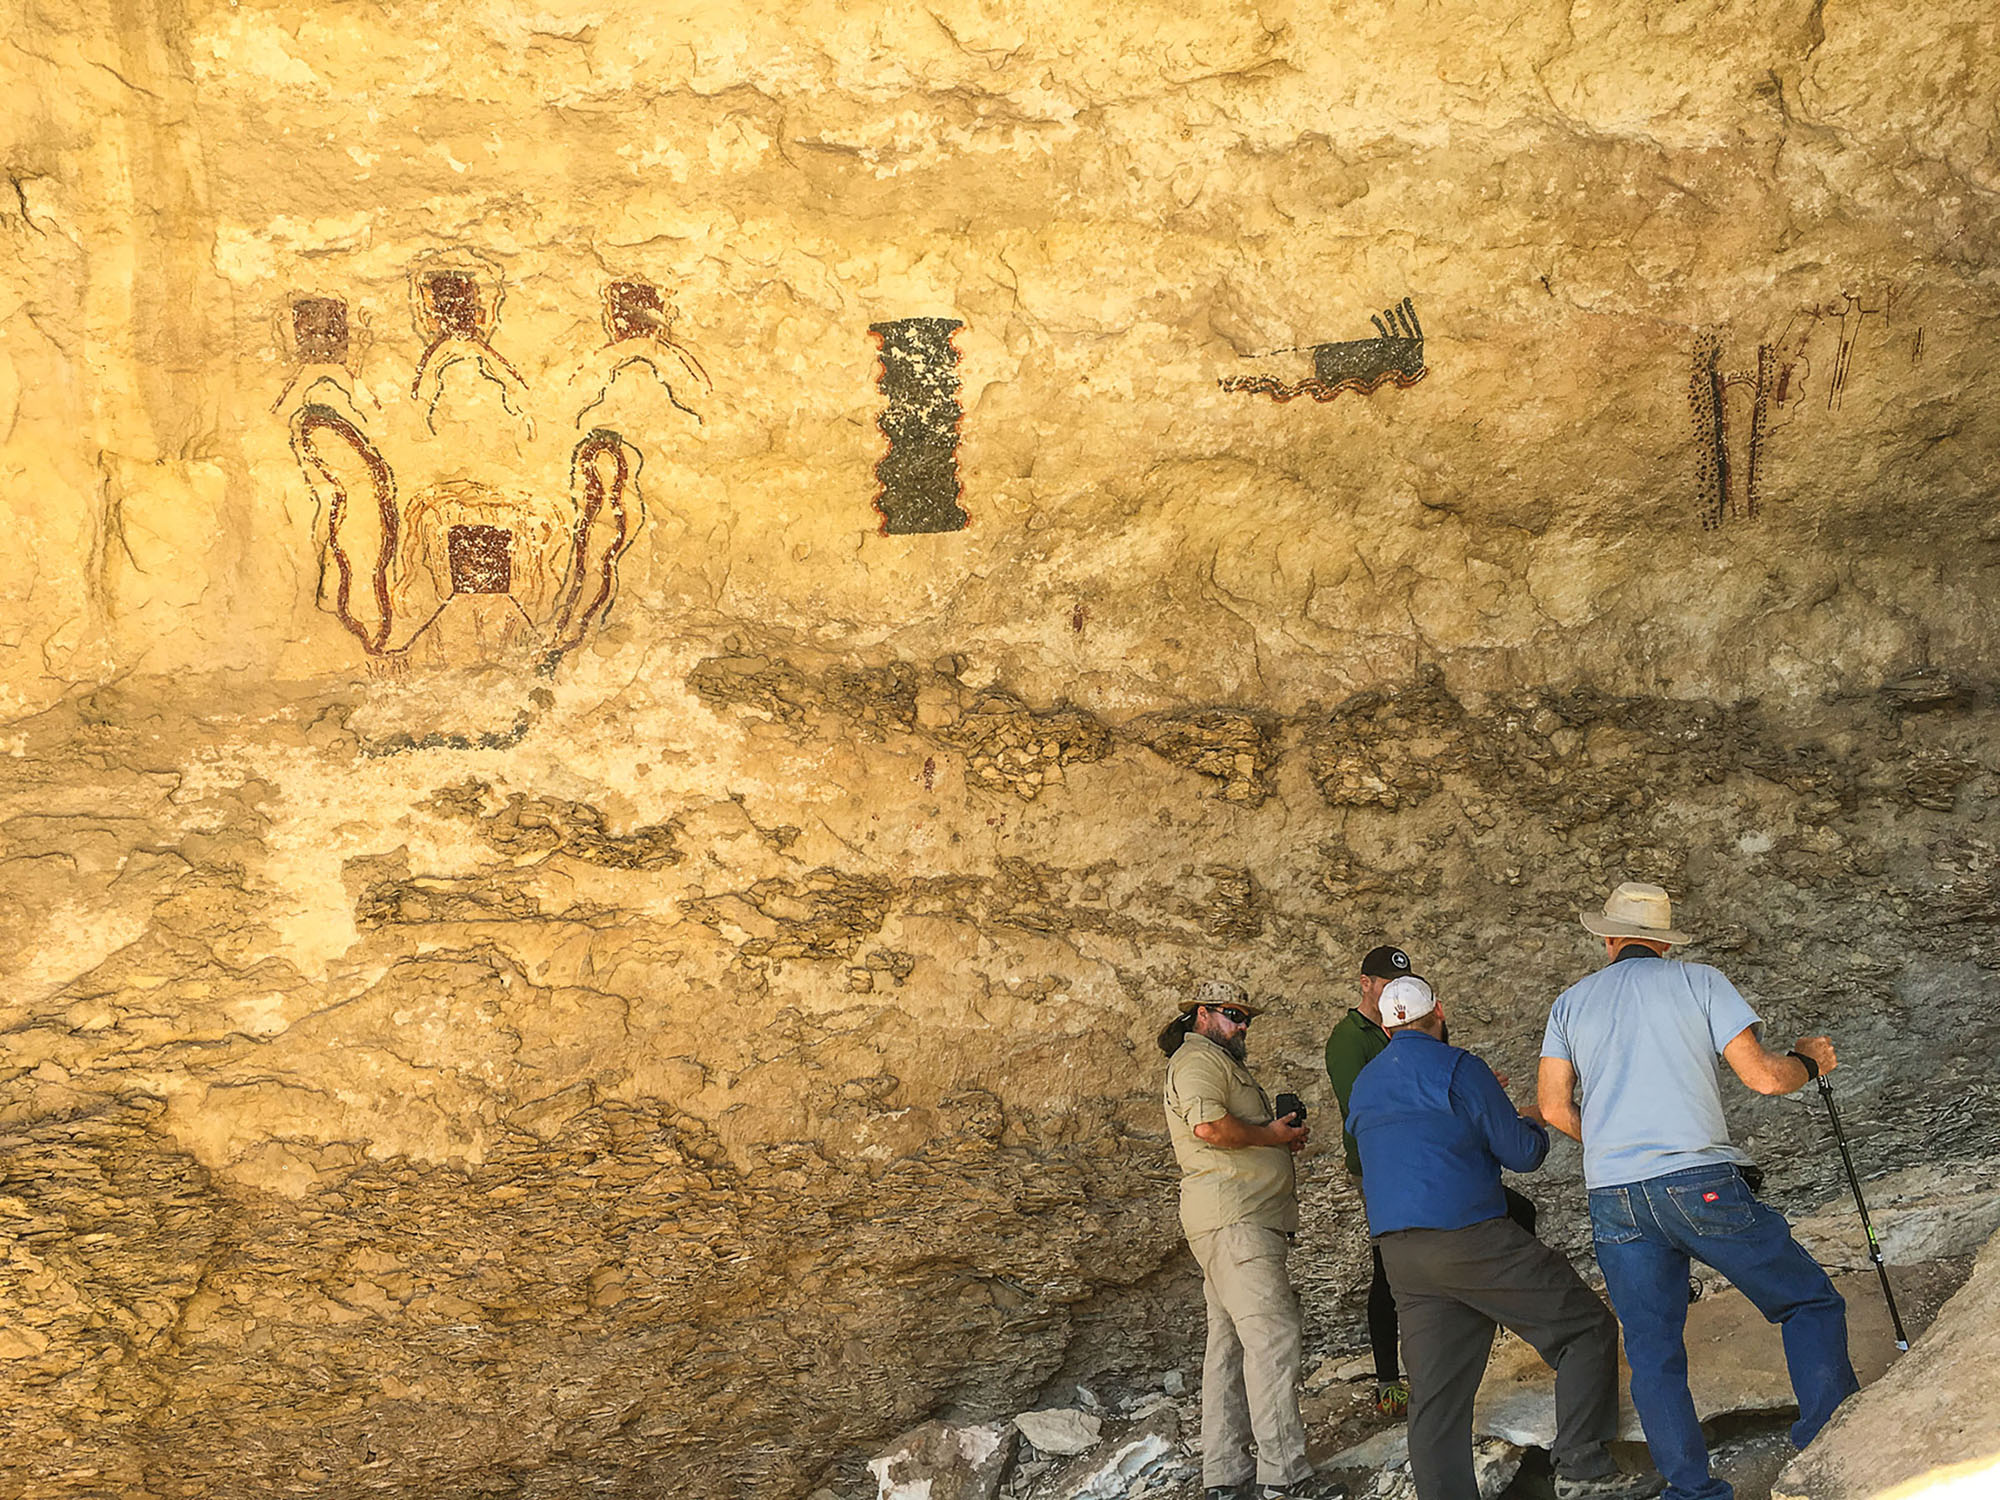 A group of people look at dark cave paintings in a yellow-walled cave